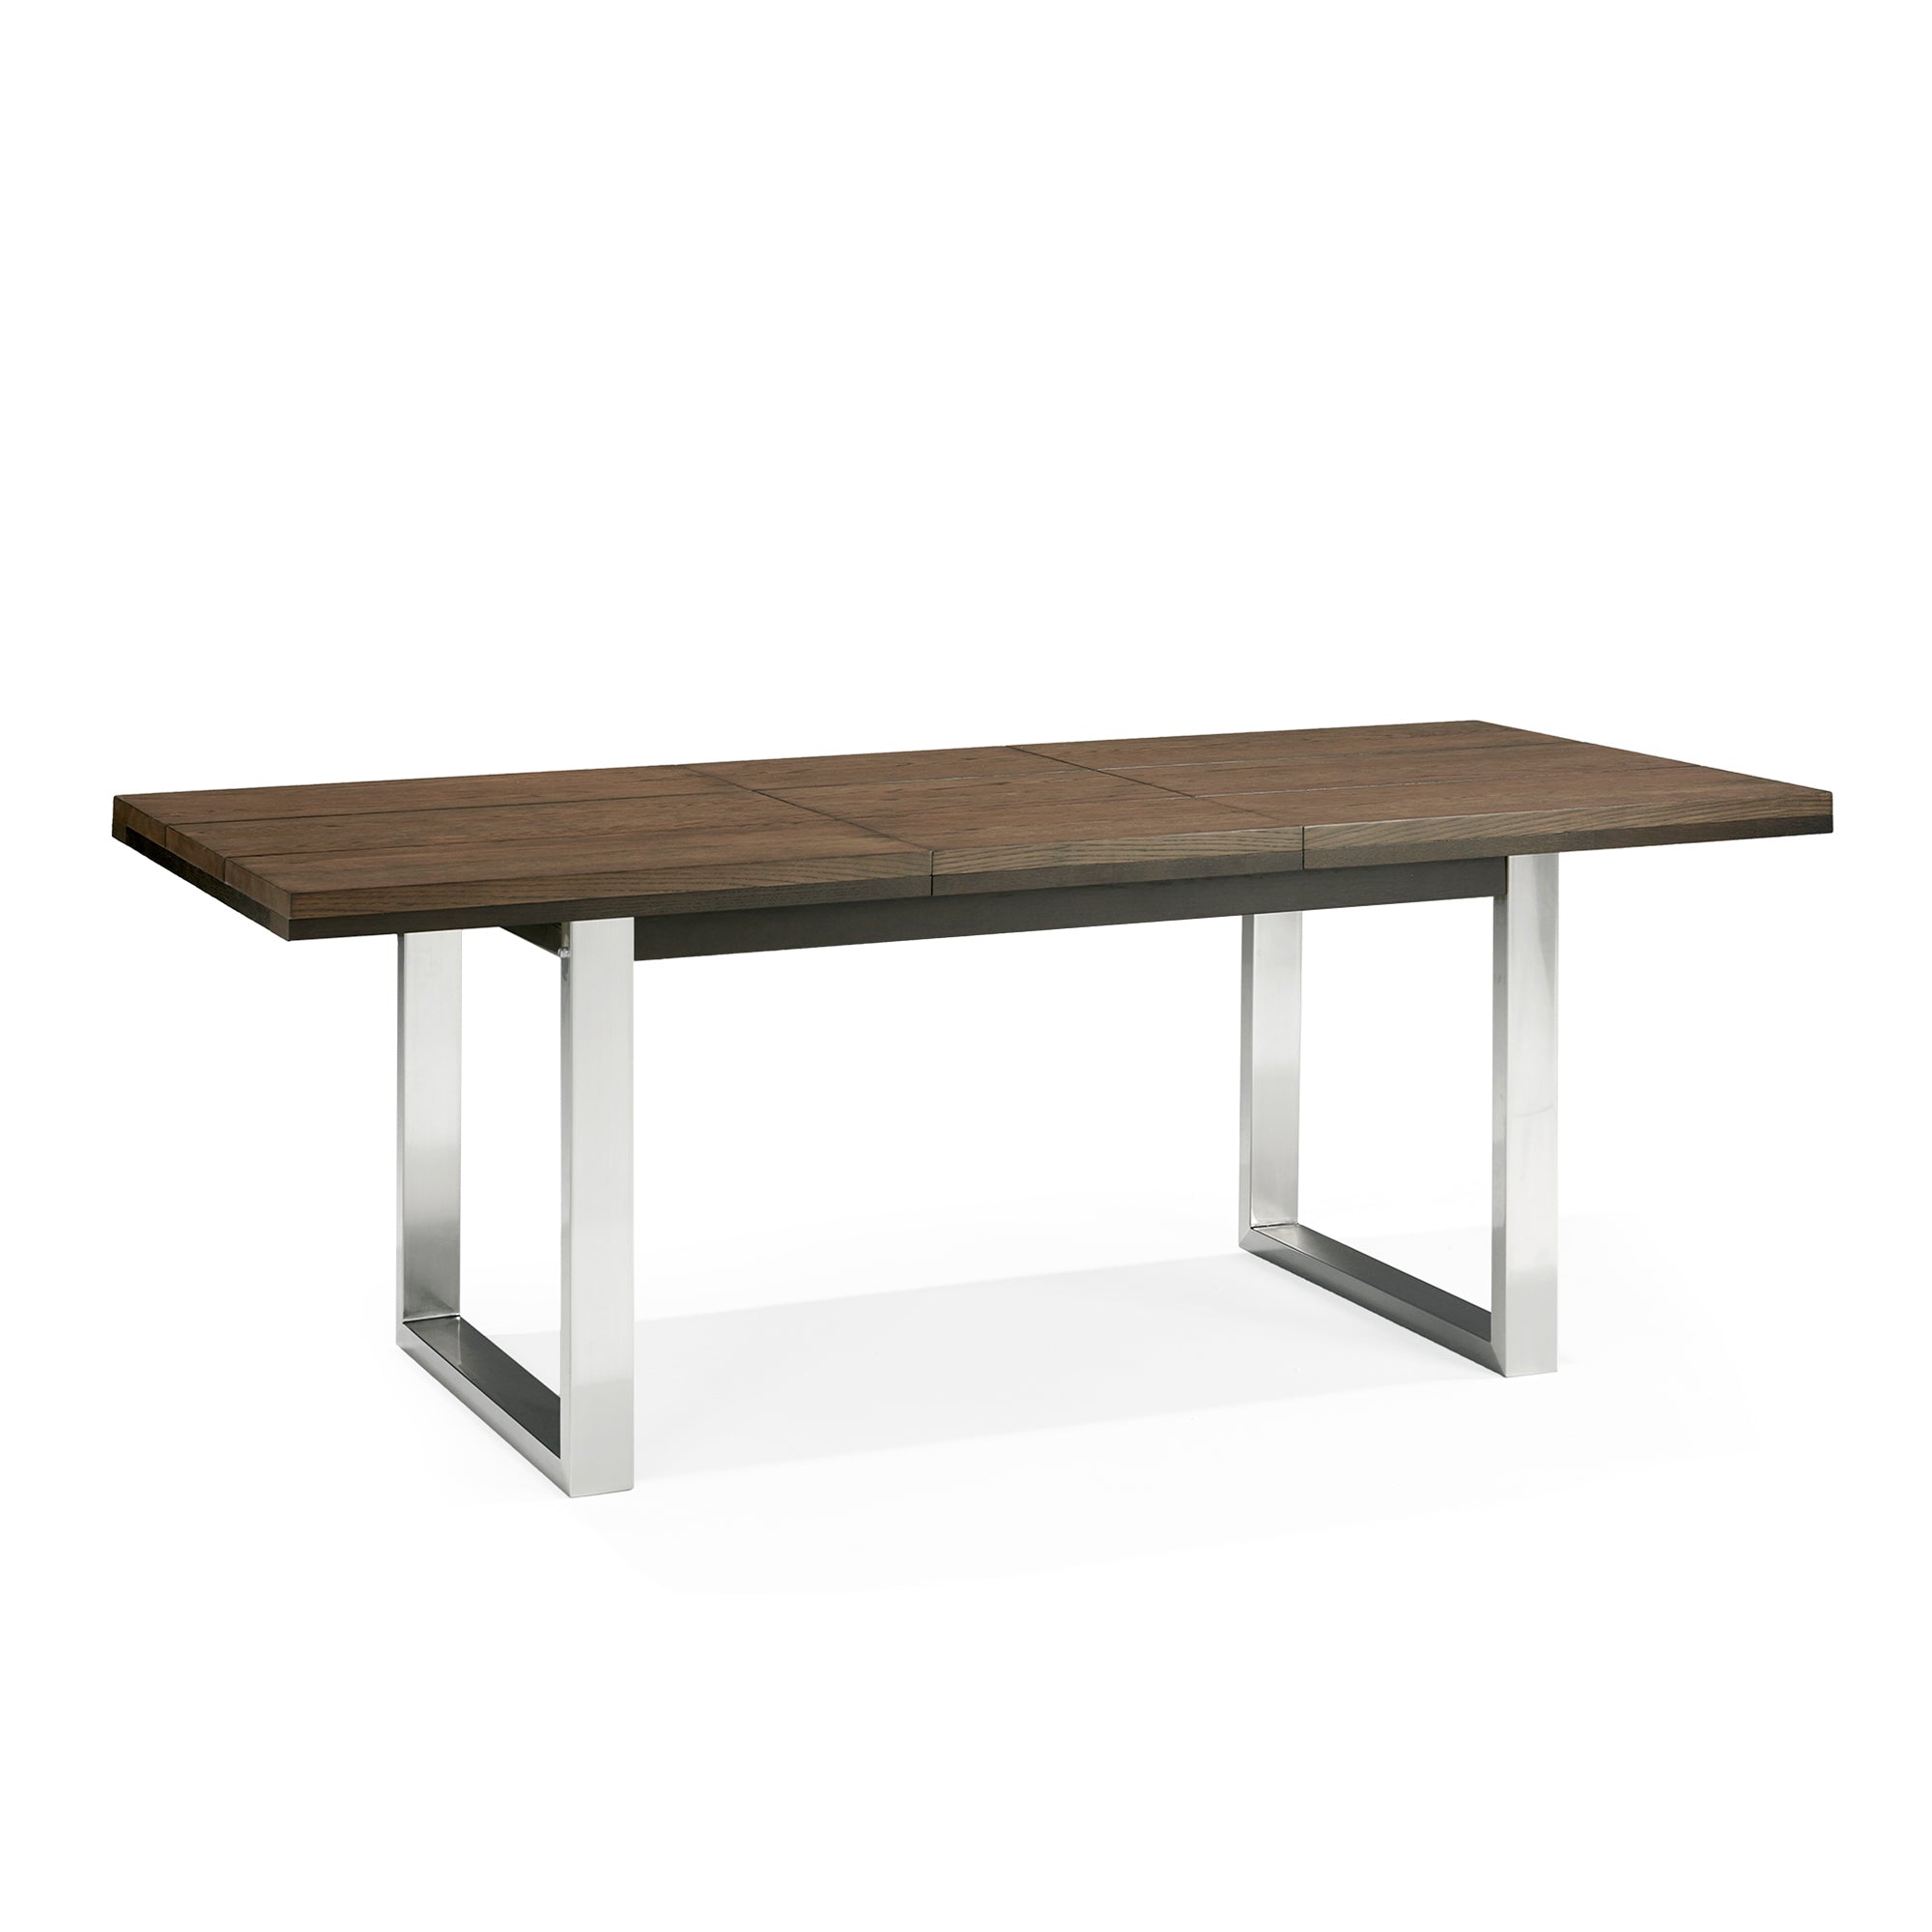 Toulouse 4 - 6 Extending Dining Table